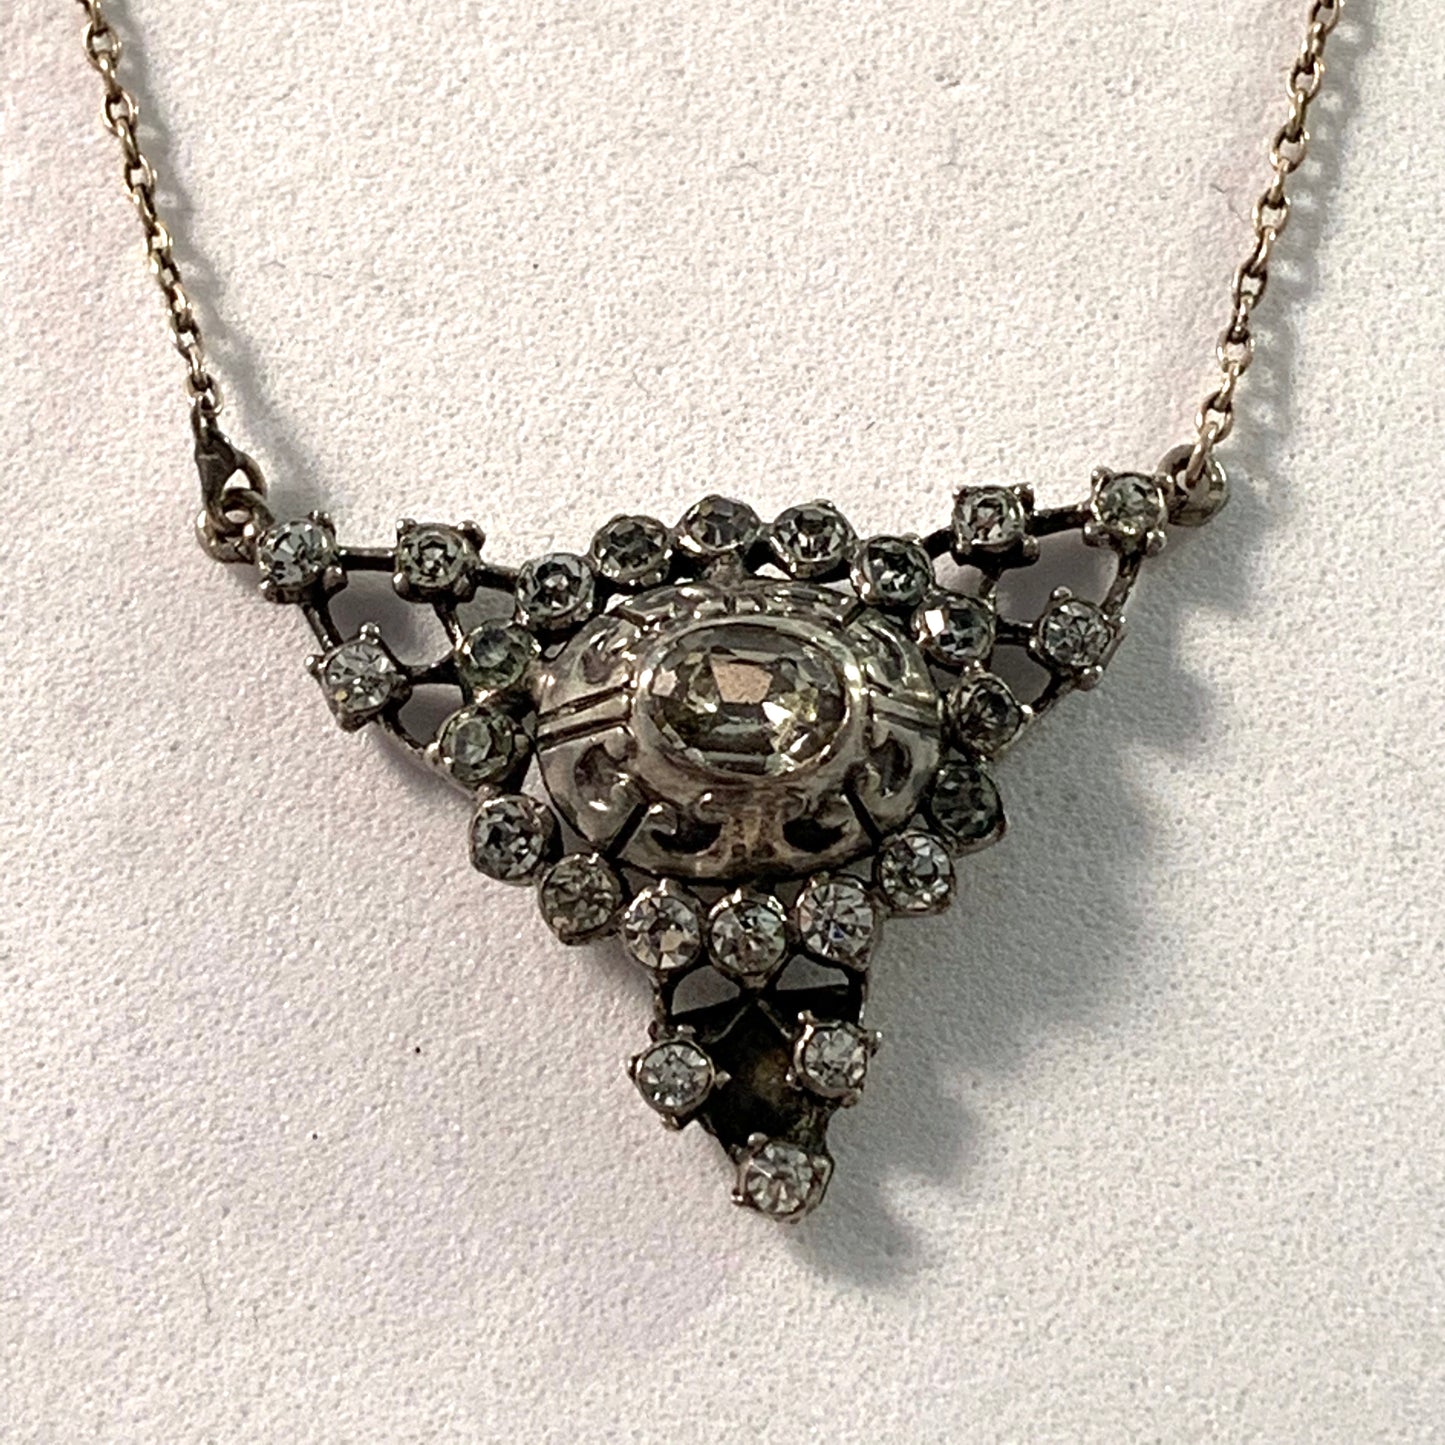 Germany early 1900s. 830 Silver Paste Stone Necklace.